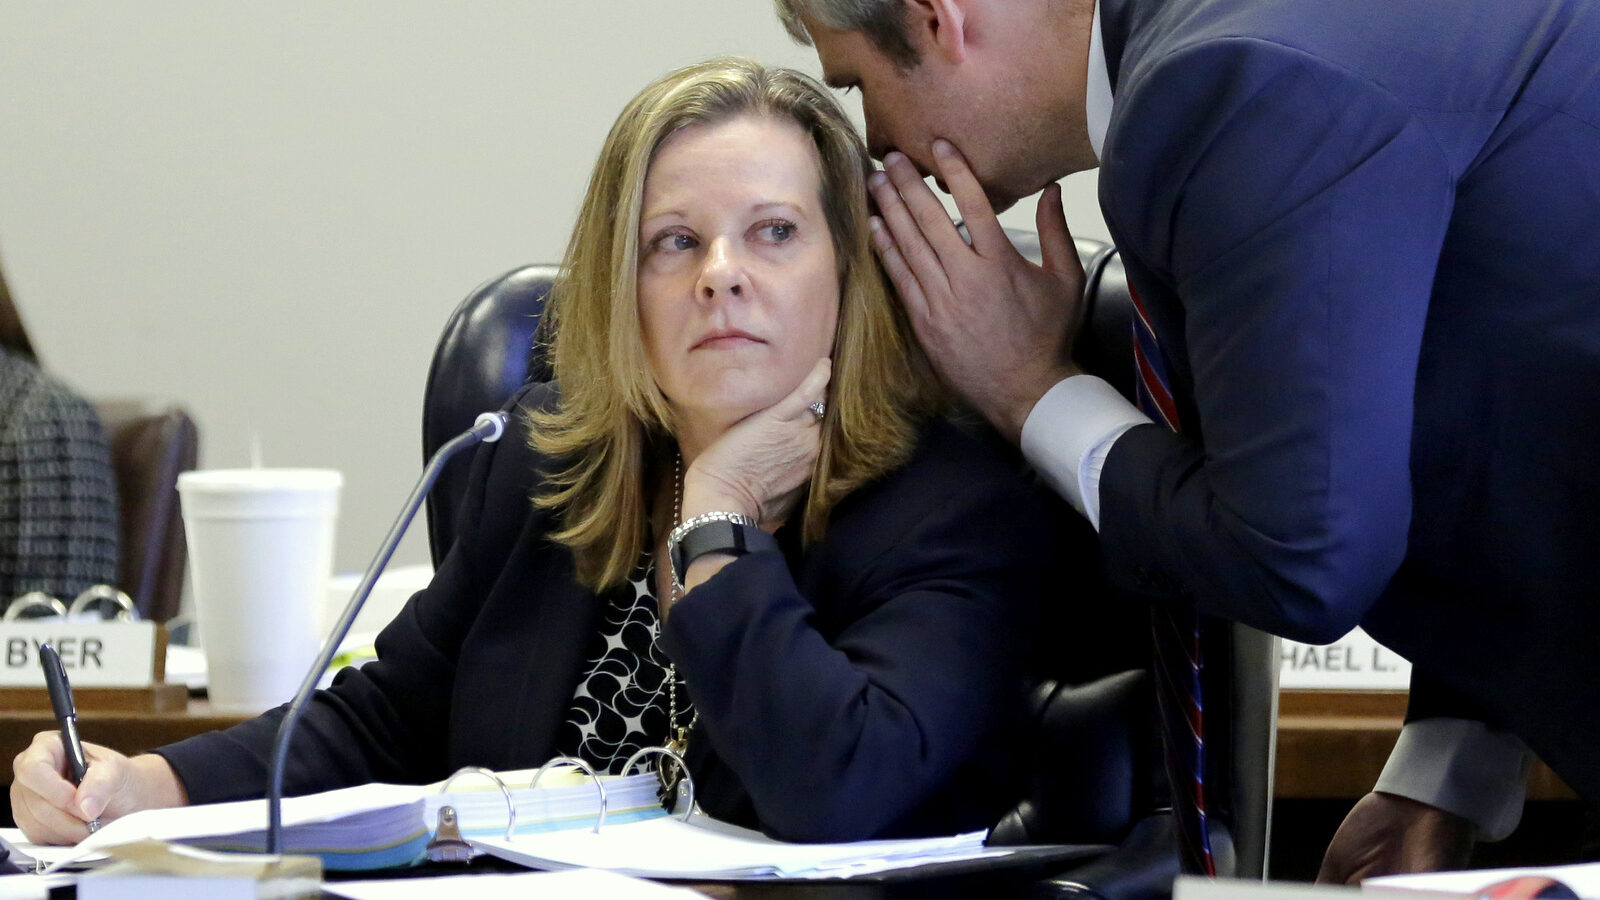 Texas Board of Education Chair Donna Bahorich, left, listens to Texas Education Agency counsel Von Byer, right, during a meeing, Wednesday, Nov. 18, 2015, in Austin, Texas. Texas could allow university professors to fact-check textbooks approved for statewide use, after a ninth-grade world geography book referred to African slaves as "workers." (AP Photo/Eric Gay)